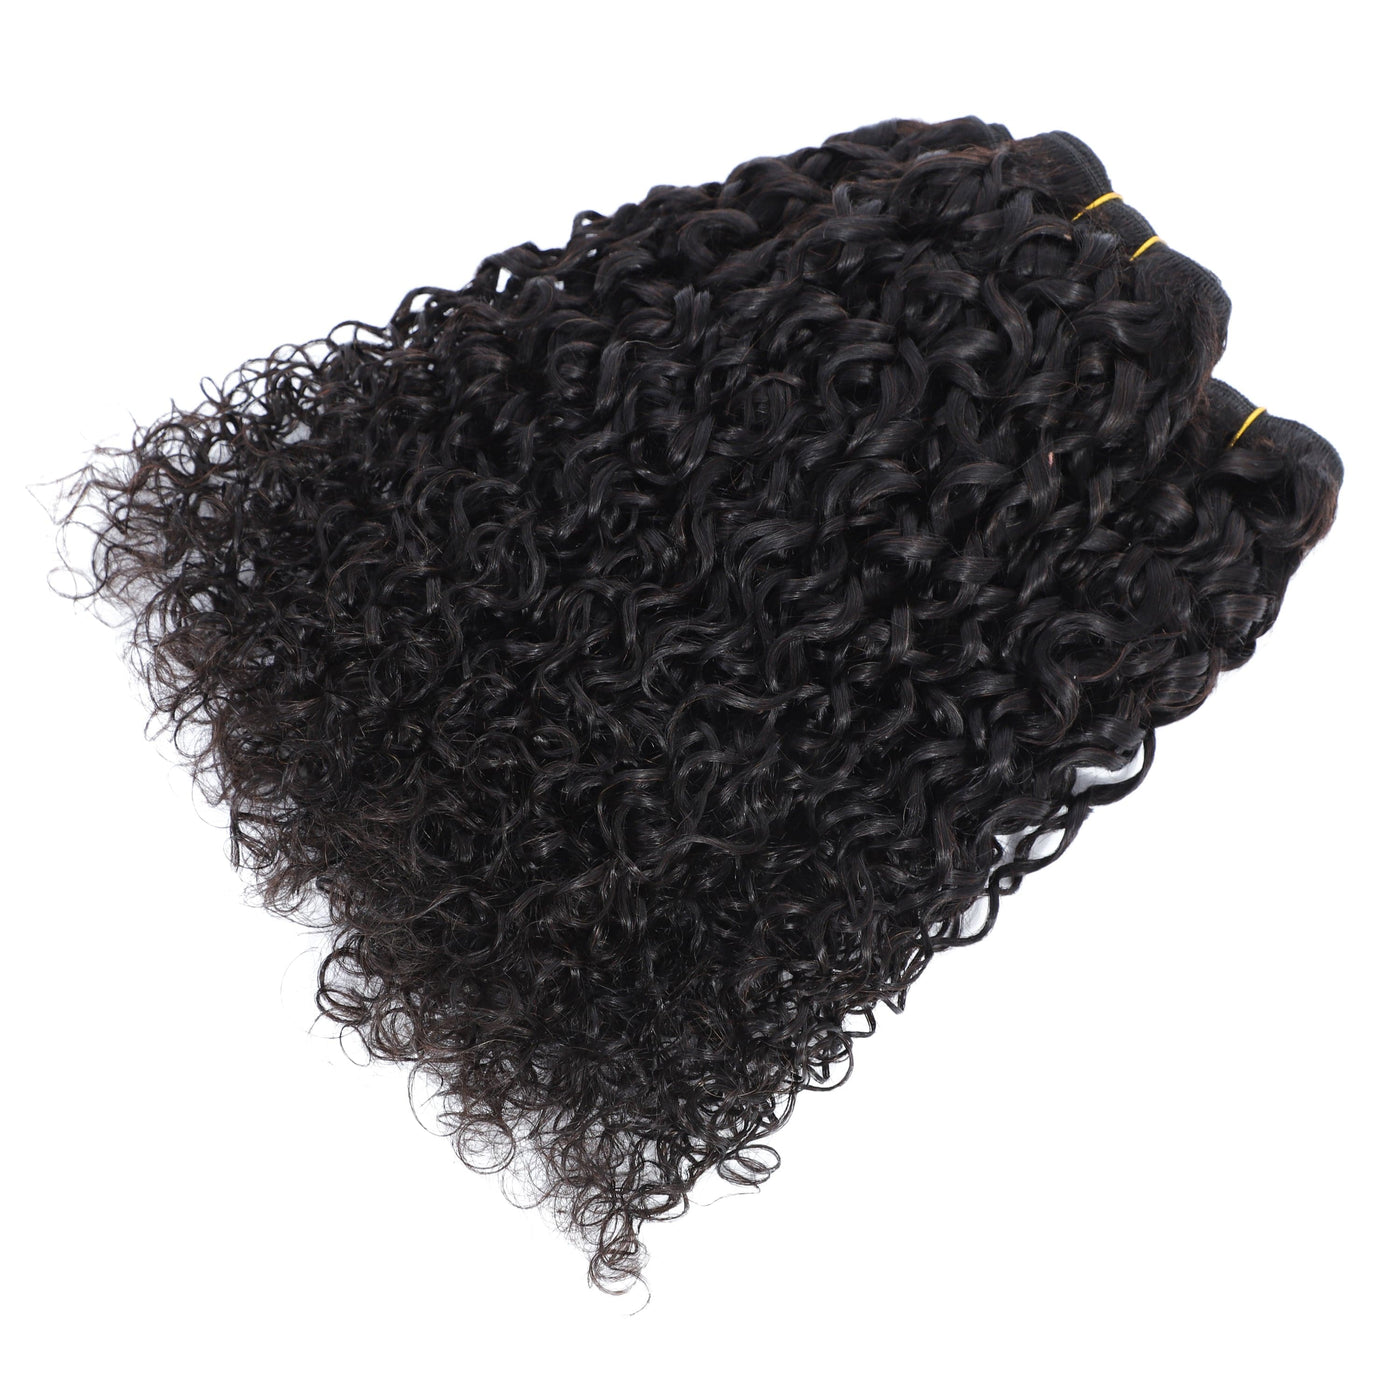 Pixie Curly 100% Human Hair 4 Bundles with 4x4 Closure Natural Color Remy Weave Virgin Hair Weave